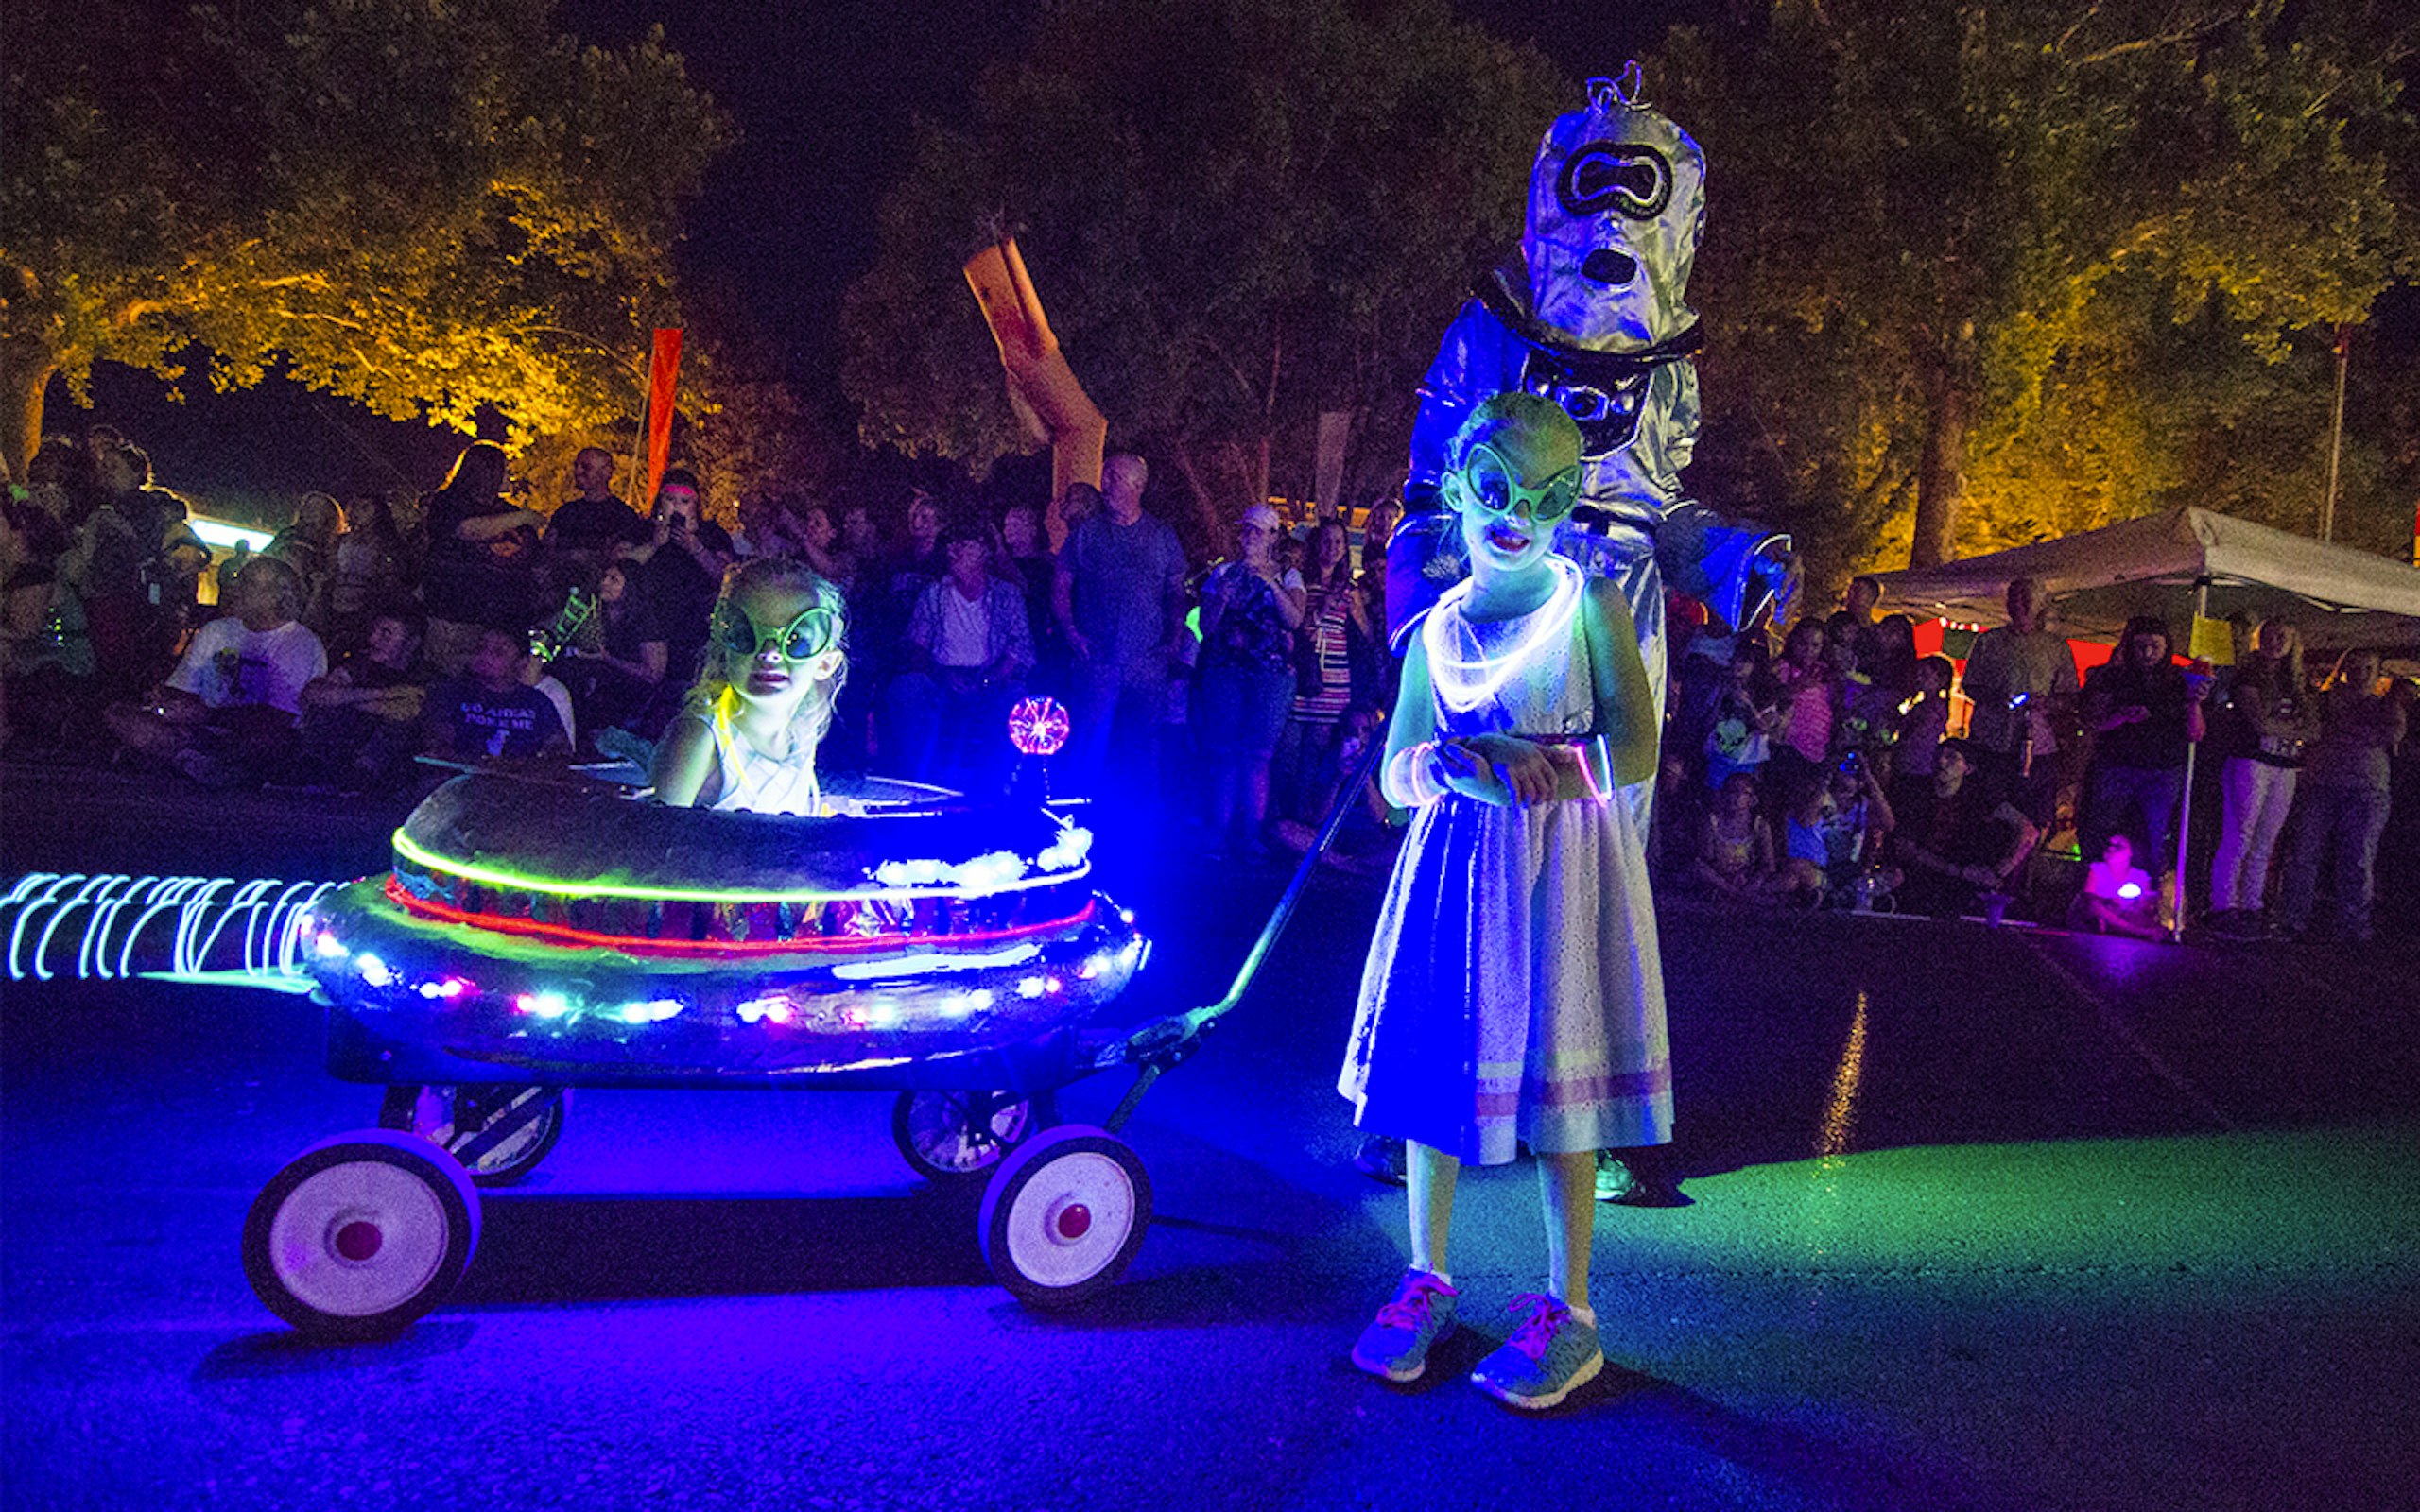 The expression on the small girl in the UFO wagon encapsulates how I felt about most of the festival.